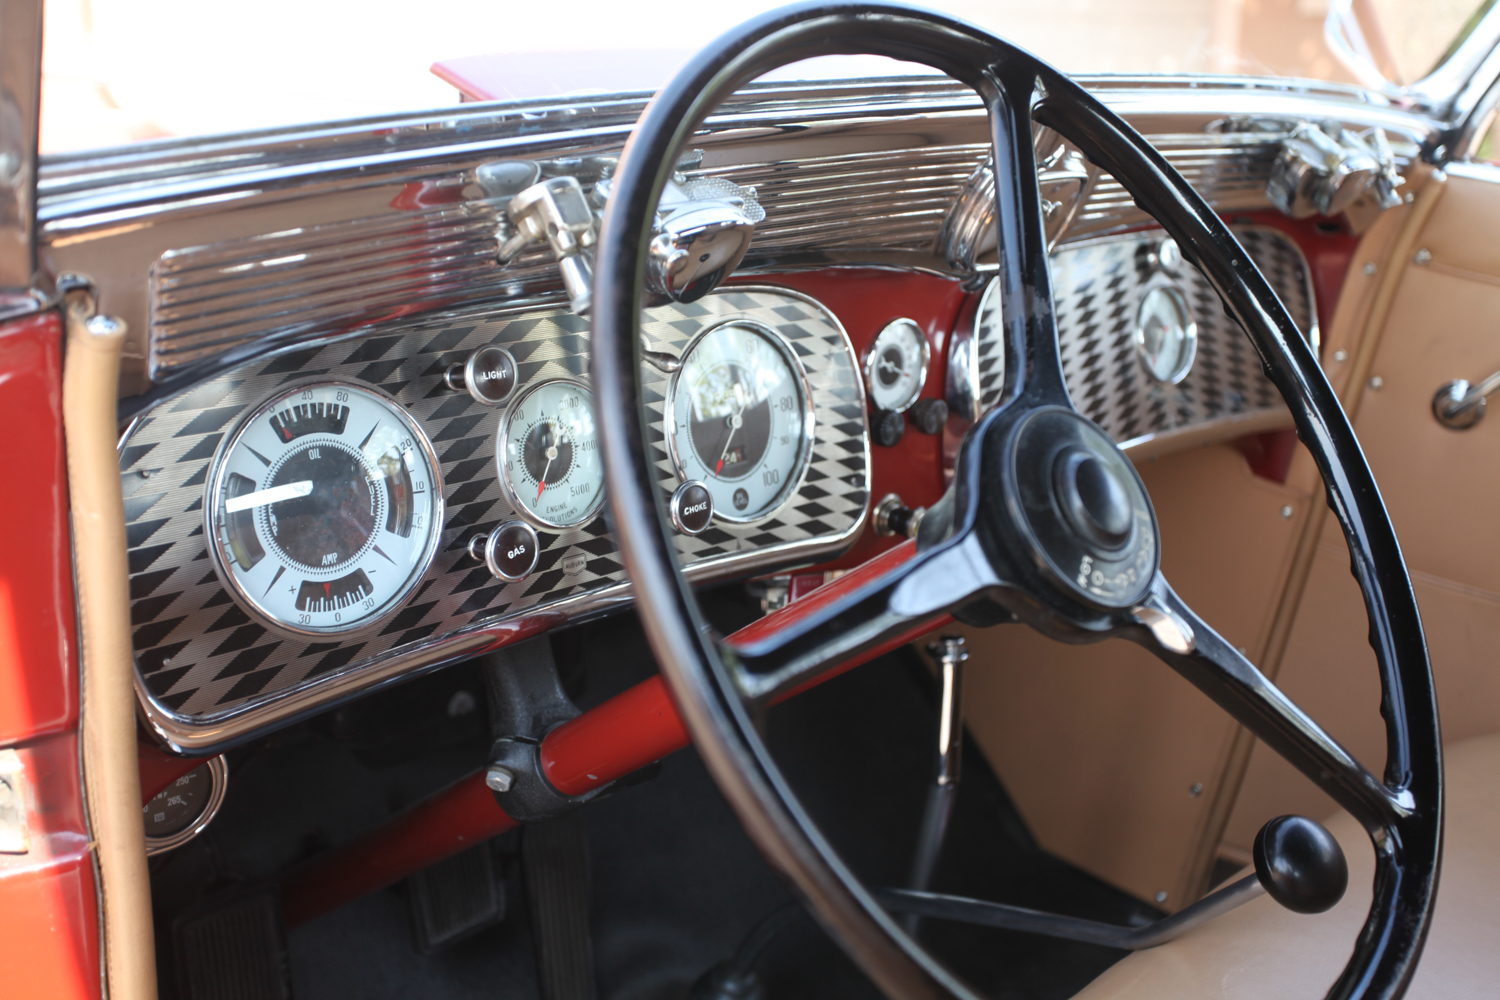 Everything about this car is beautiful, including the dash.